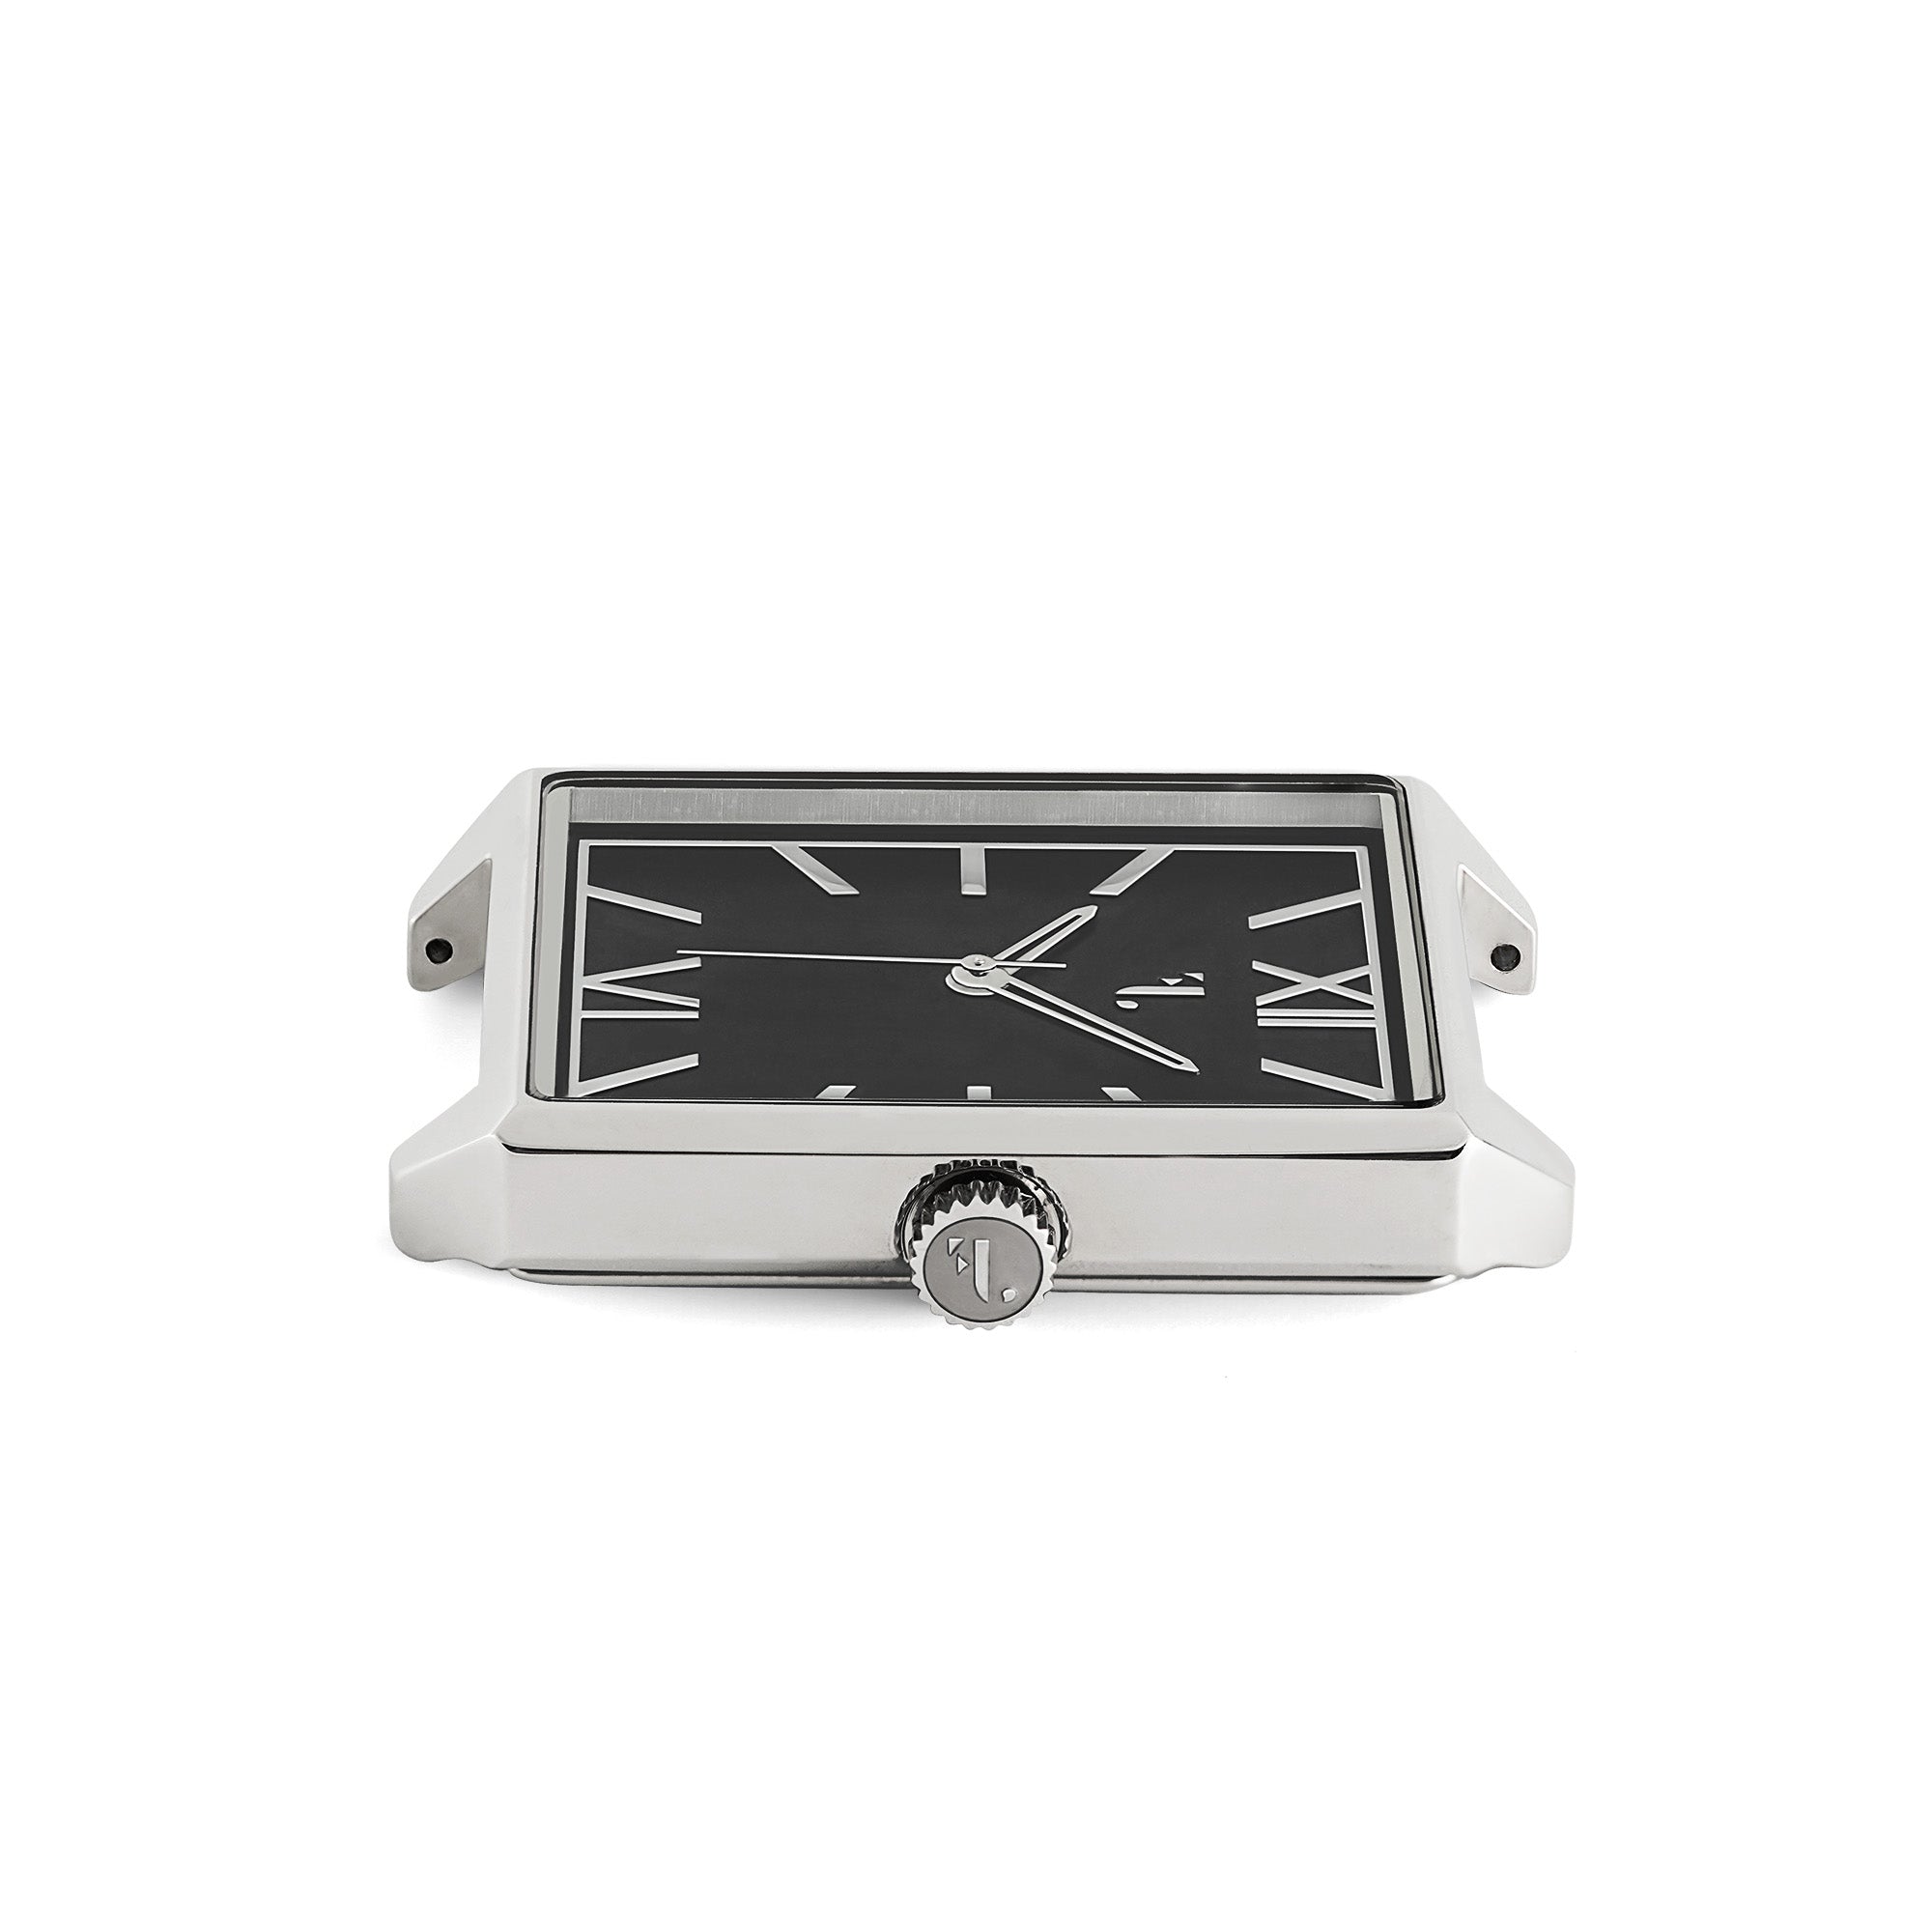 Uccle watch. It is made of a square silver case and a black dial. It is the ideal watch for a man, with its three hands, its quartz mechanism, its water resistance and its 2 year warranty.